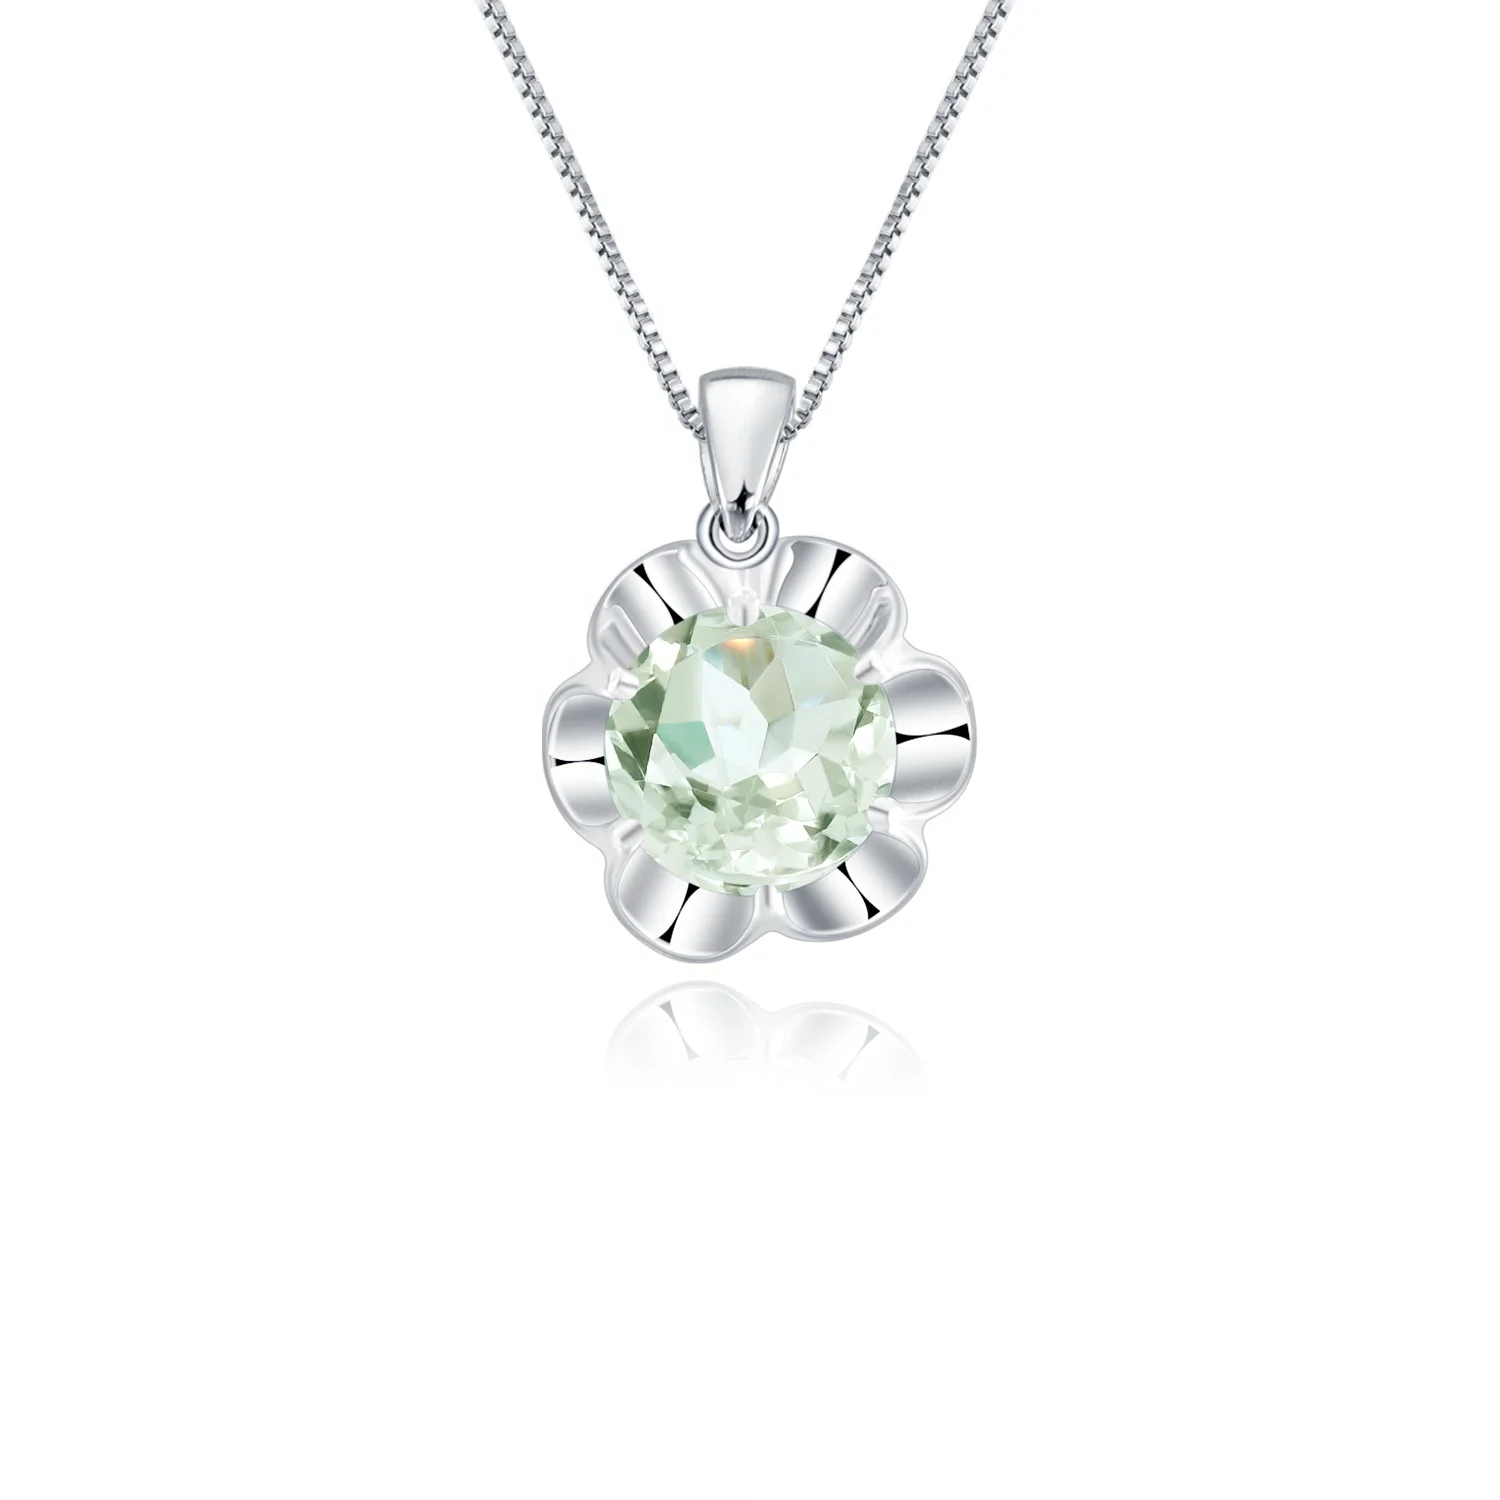 

Abiding 9Mm Big Natural Green Amethyst Stone 925 Sterling Silver Flower Pendant Necklace Jewelry For Women Wedding